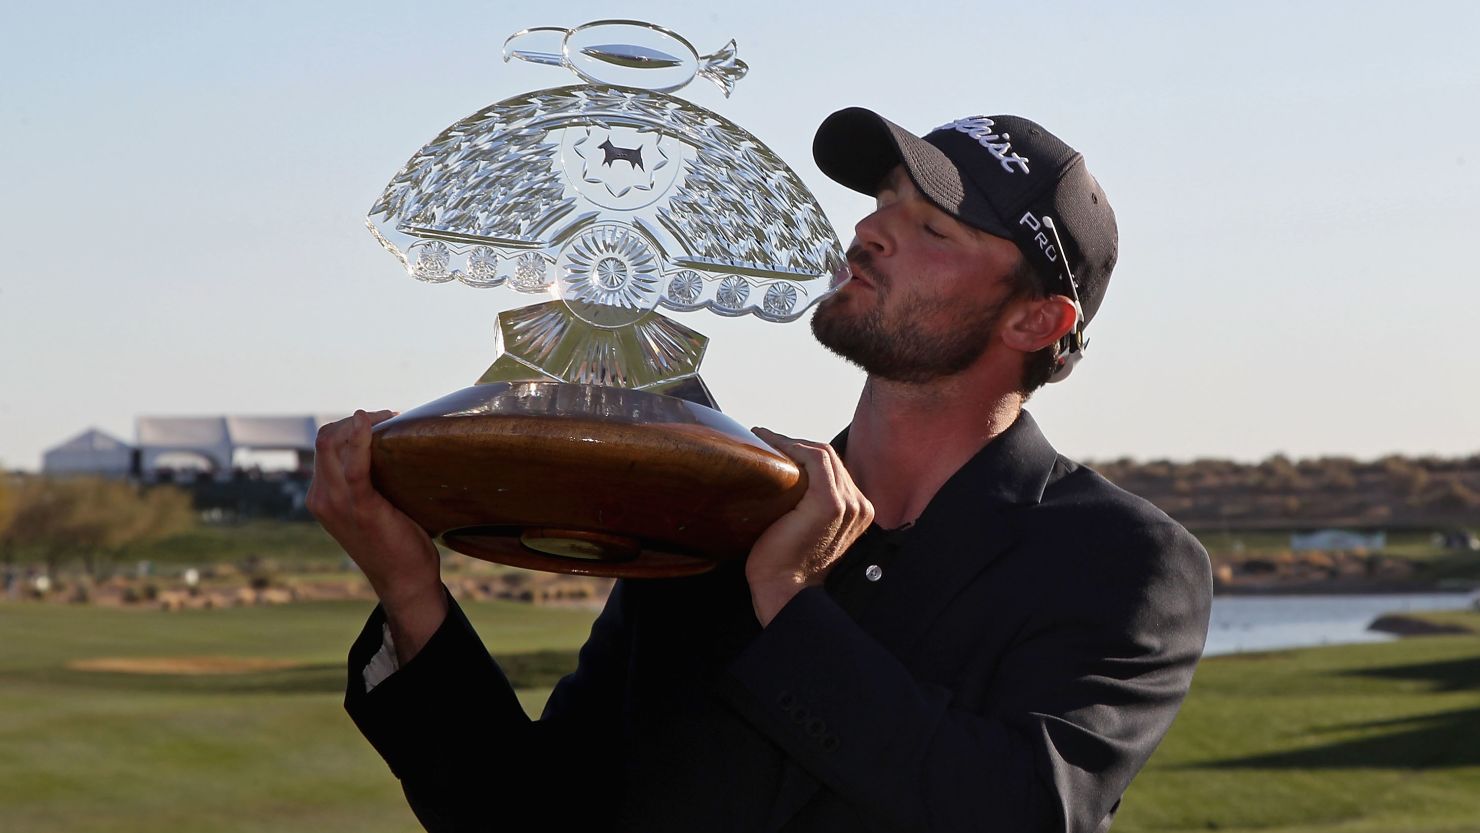 American golfer Kyle Stanley won his first tournament since turning professional in 2009.